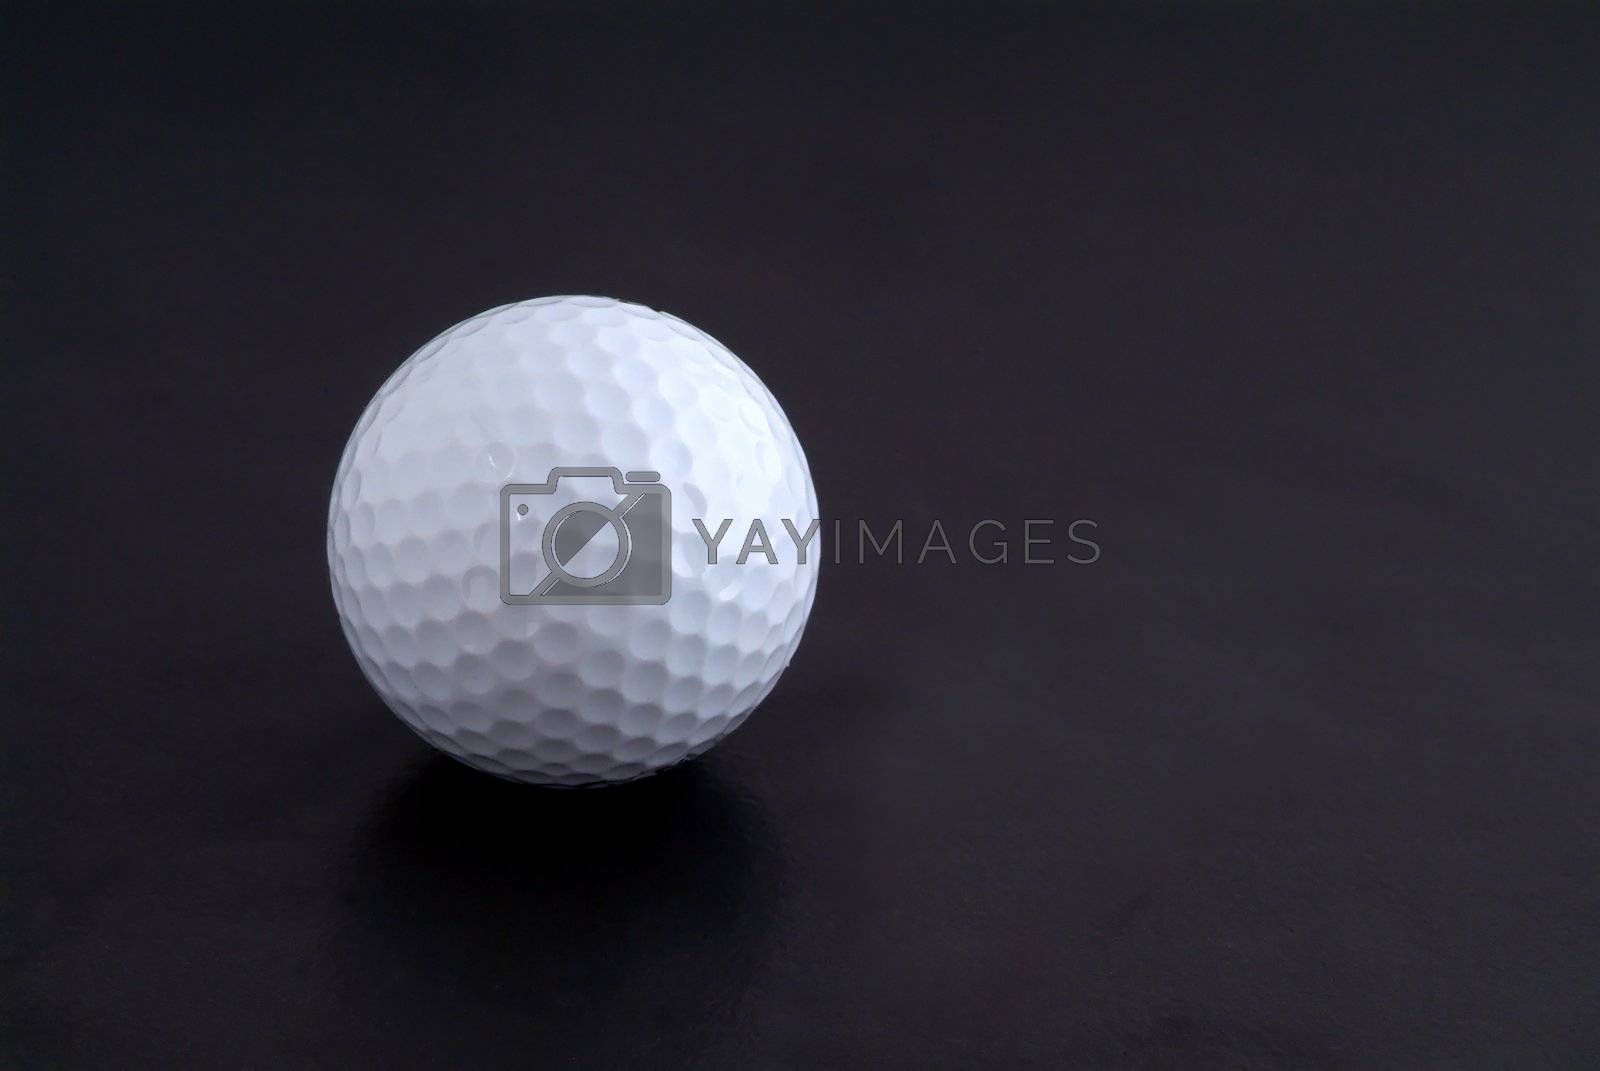 Royalty free image of Golf ball and tee by epixx